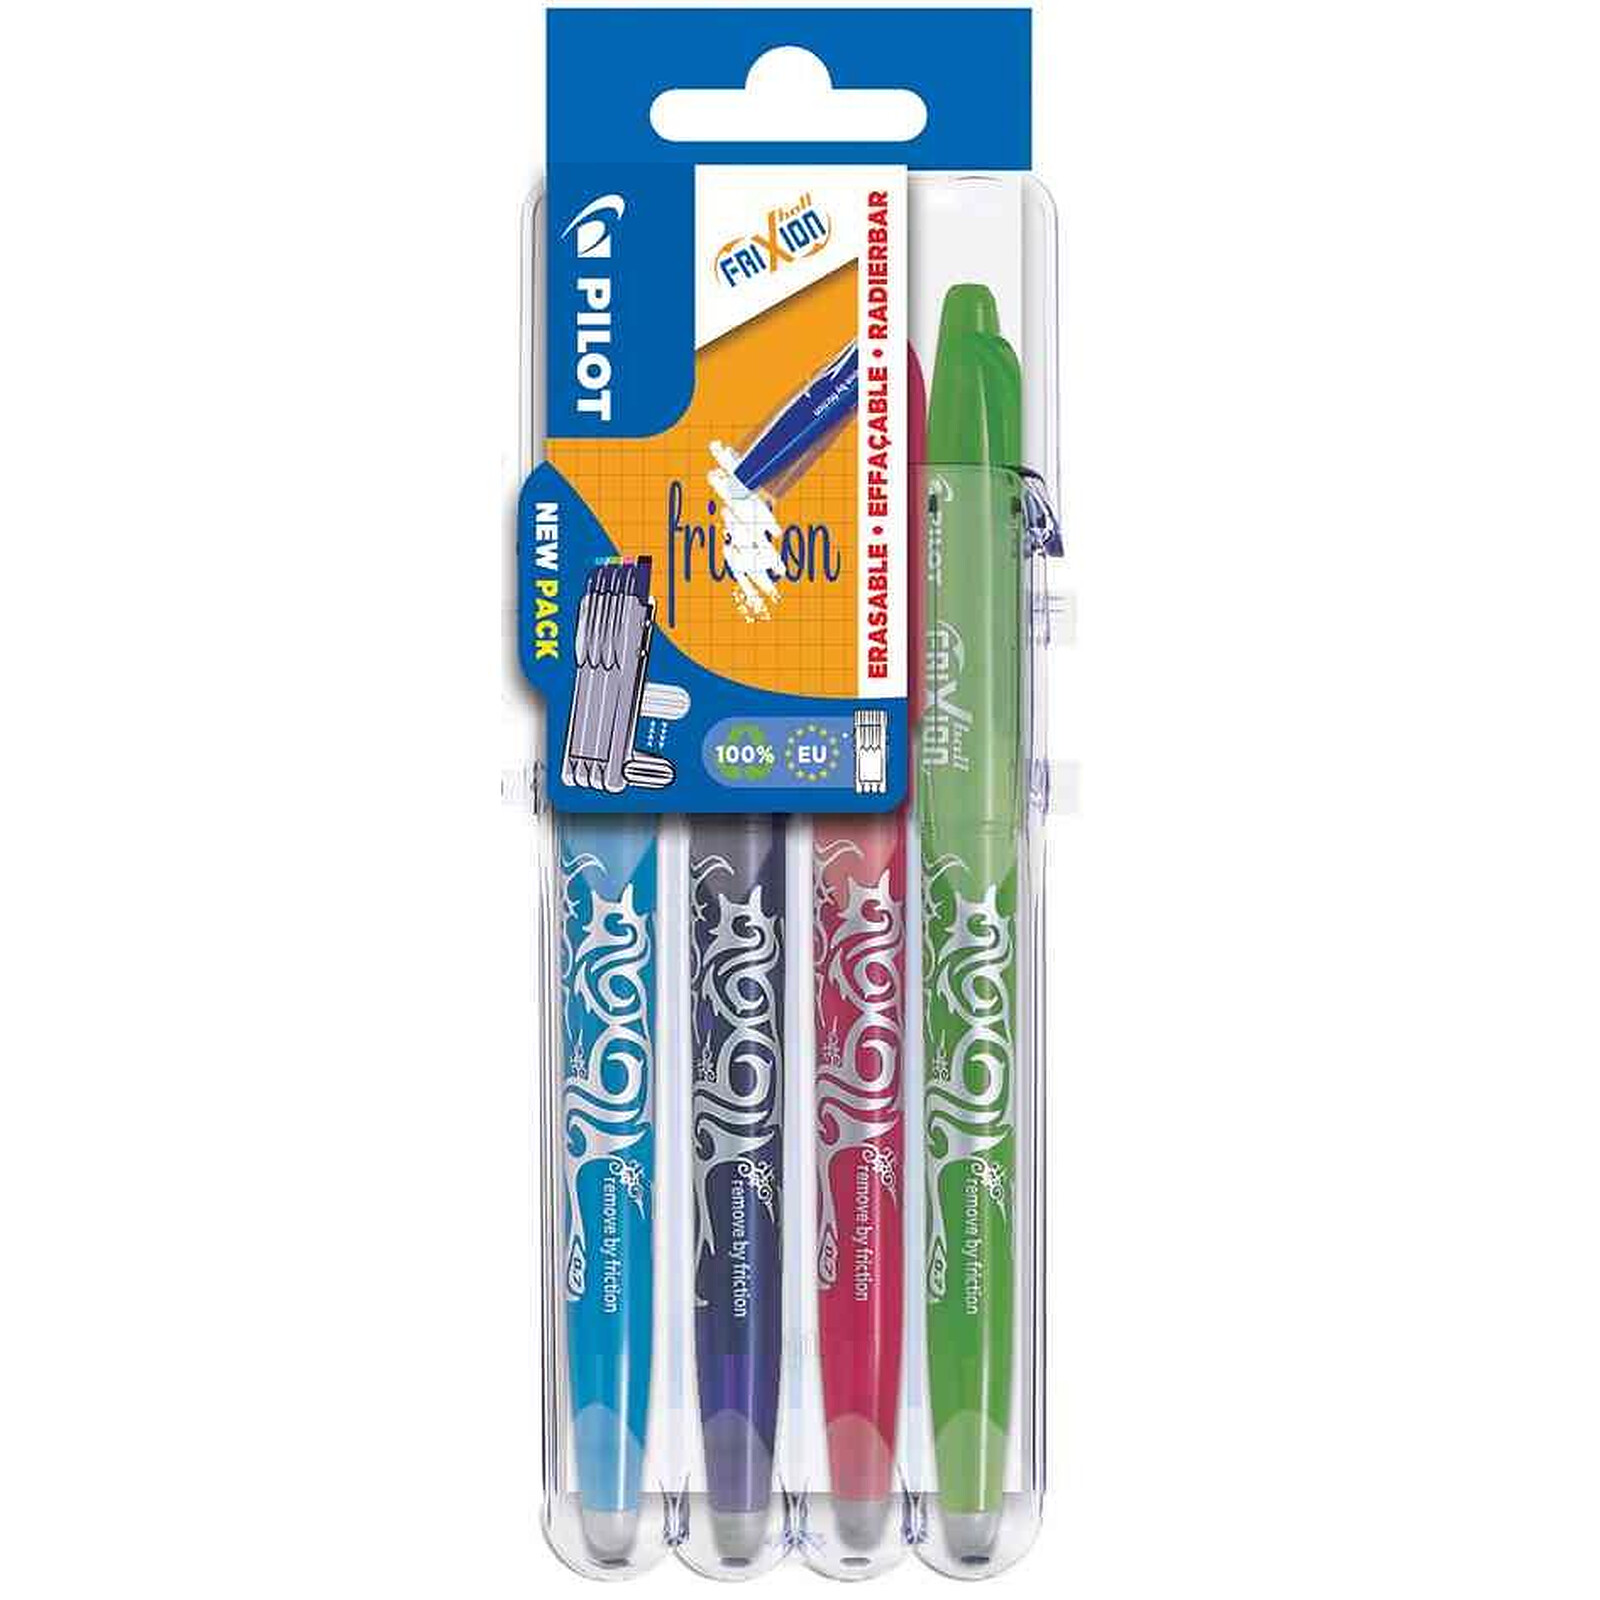 ETUI 3 RECHARGES STYLO ROLLER FRIXION